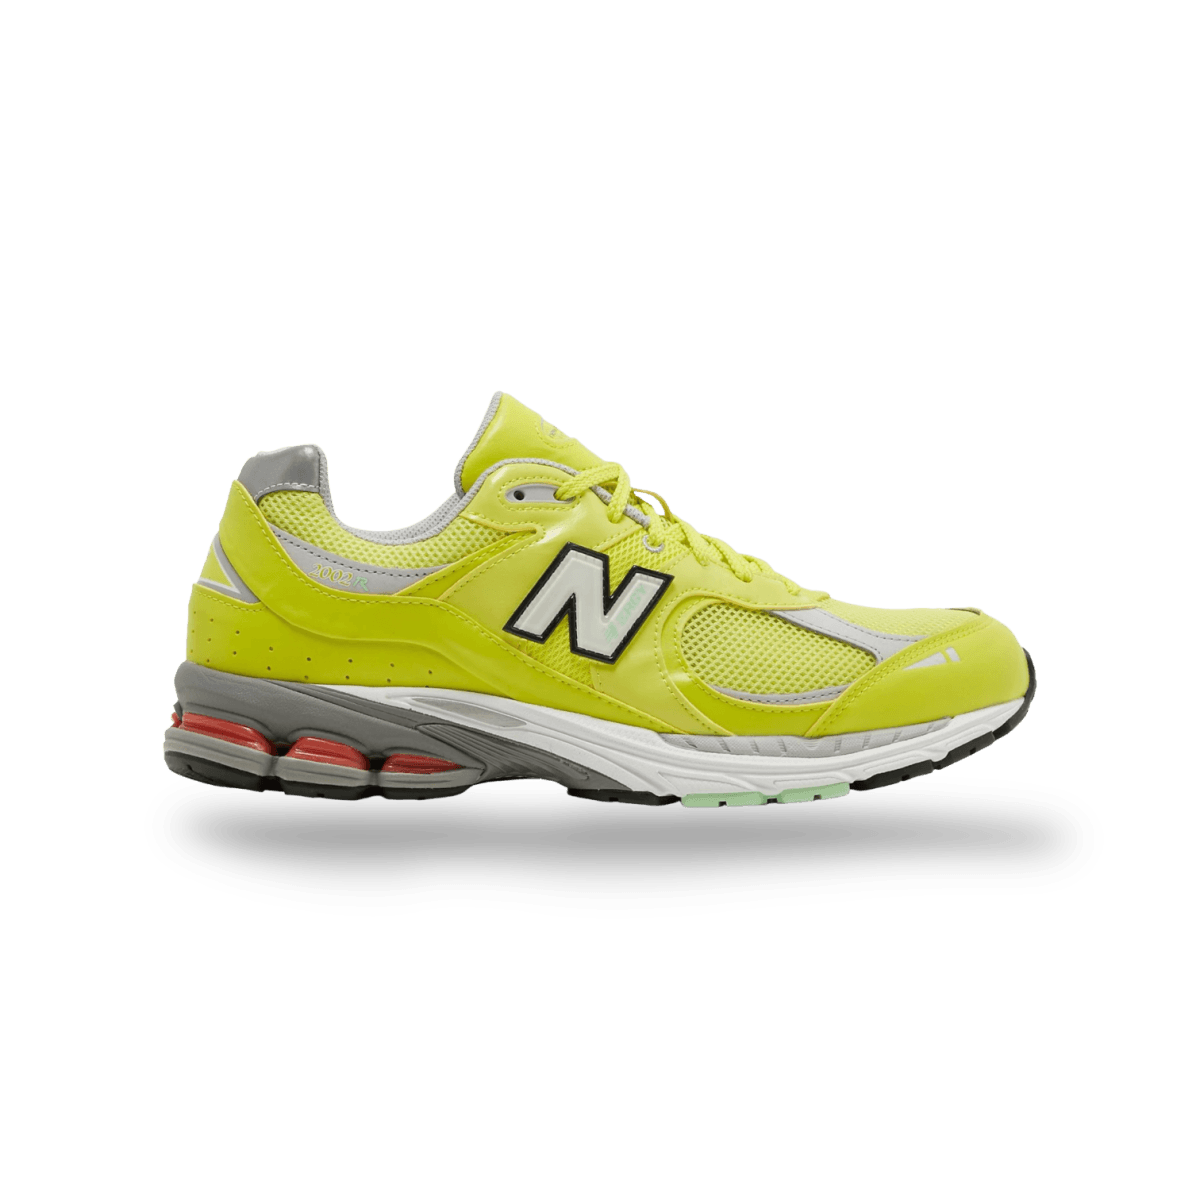 New Balance 2002R 'Sulpher Yellow' - Low Sneaker - New Balance - Jawns on Fire - sneakers